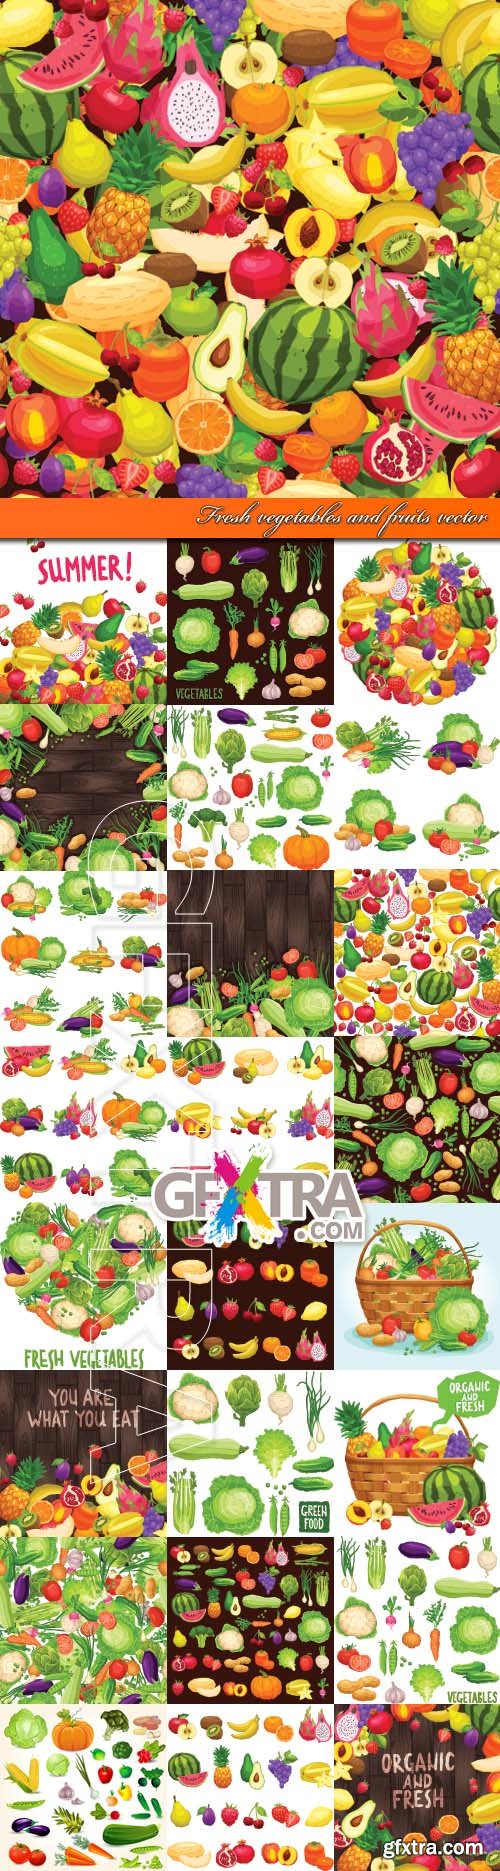 Fresh vegetables and fruits vector